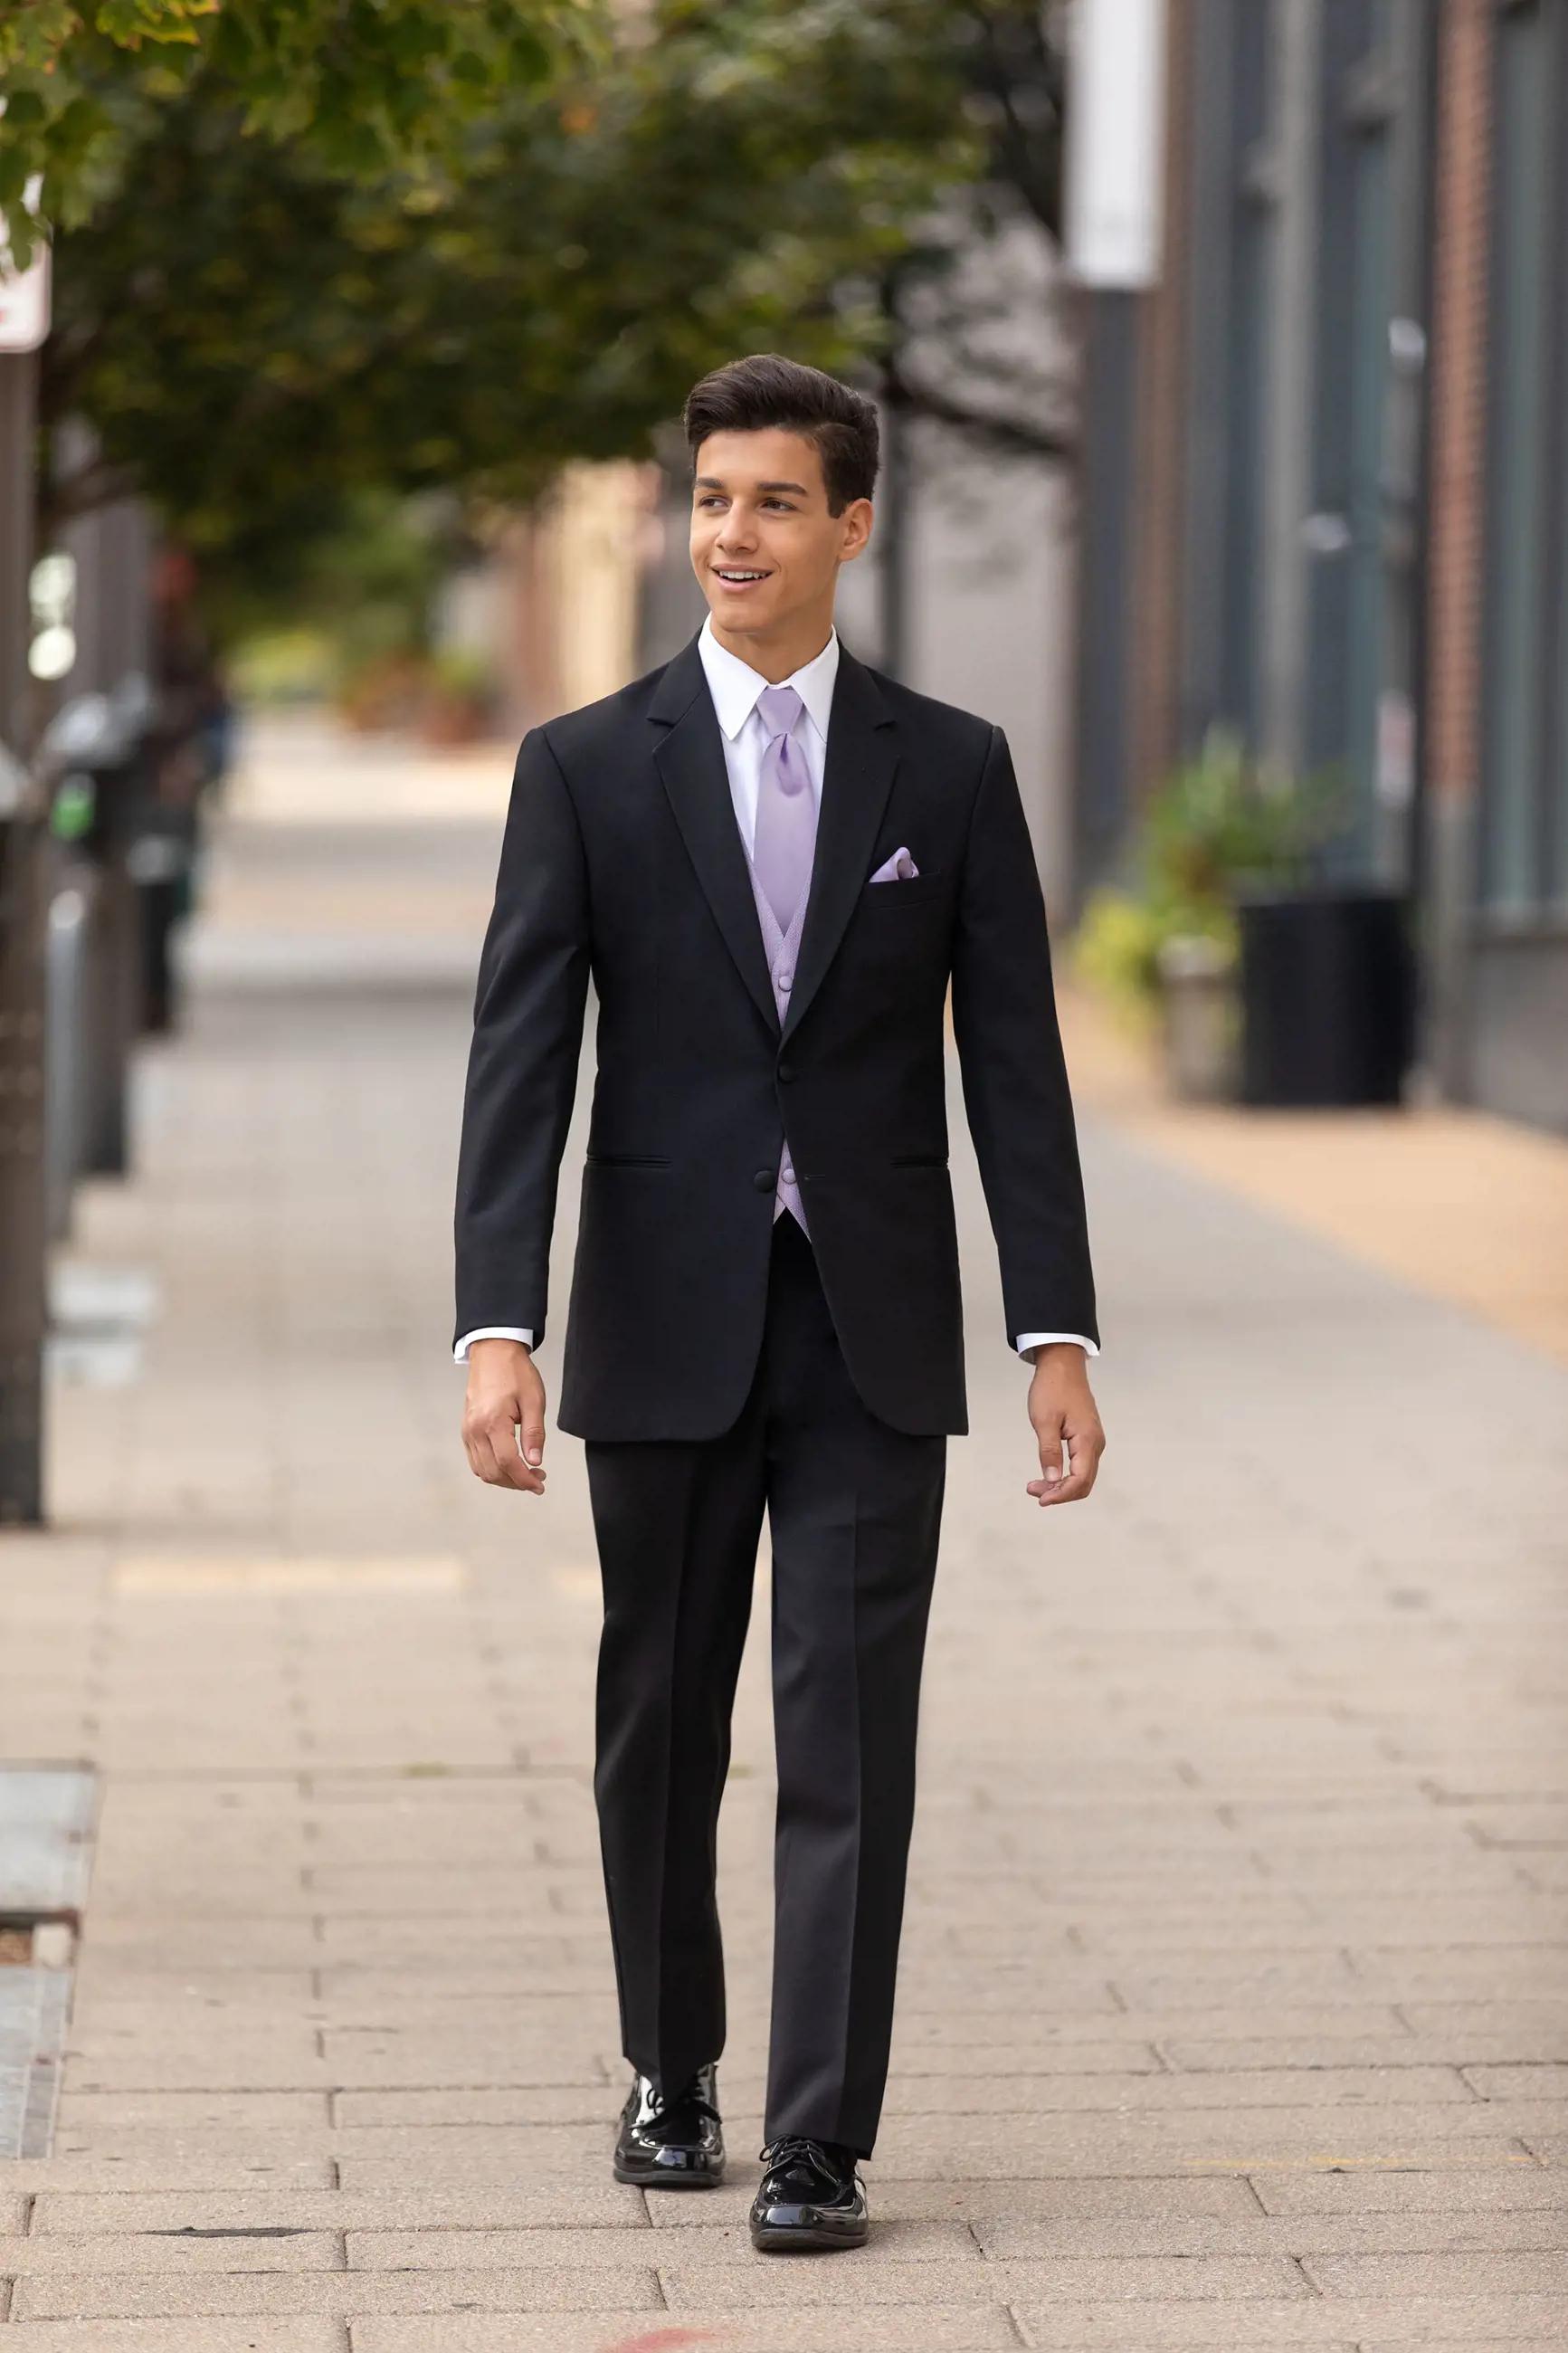 Model wearing a black suit at the street